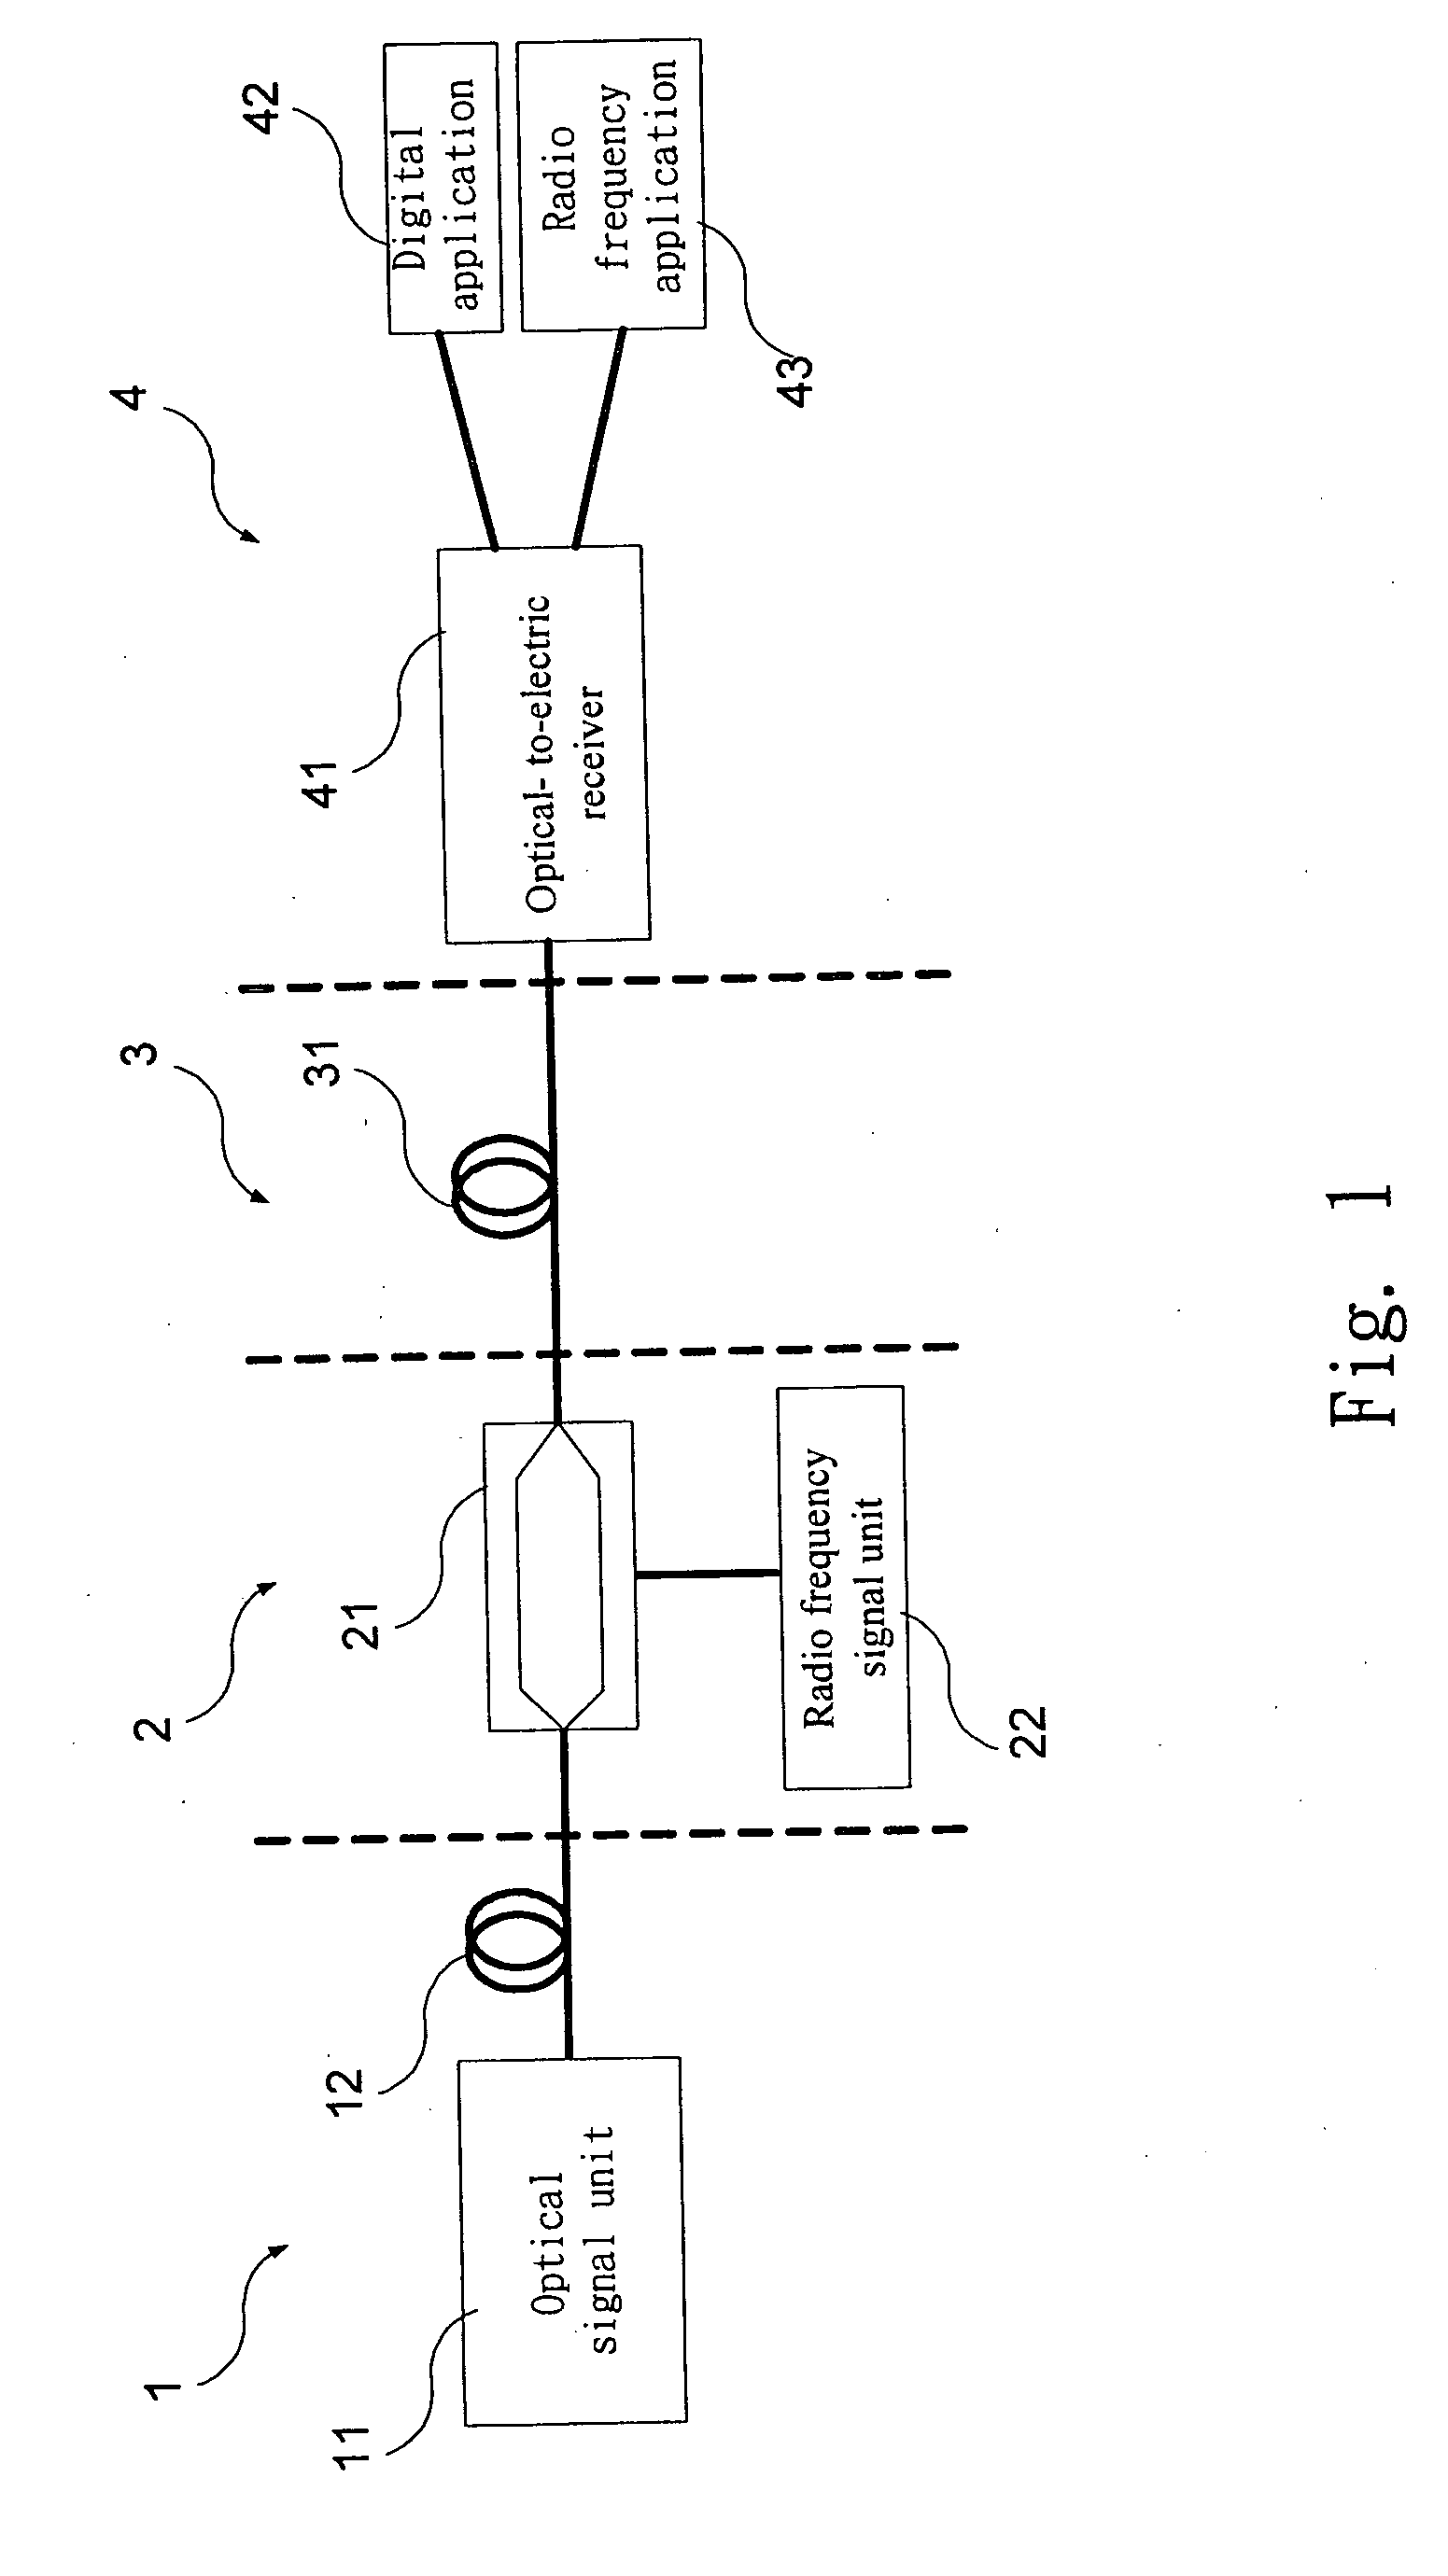 Method and apparatus for transporting ethernet and radio frequency signals in fiber-optic system